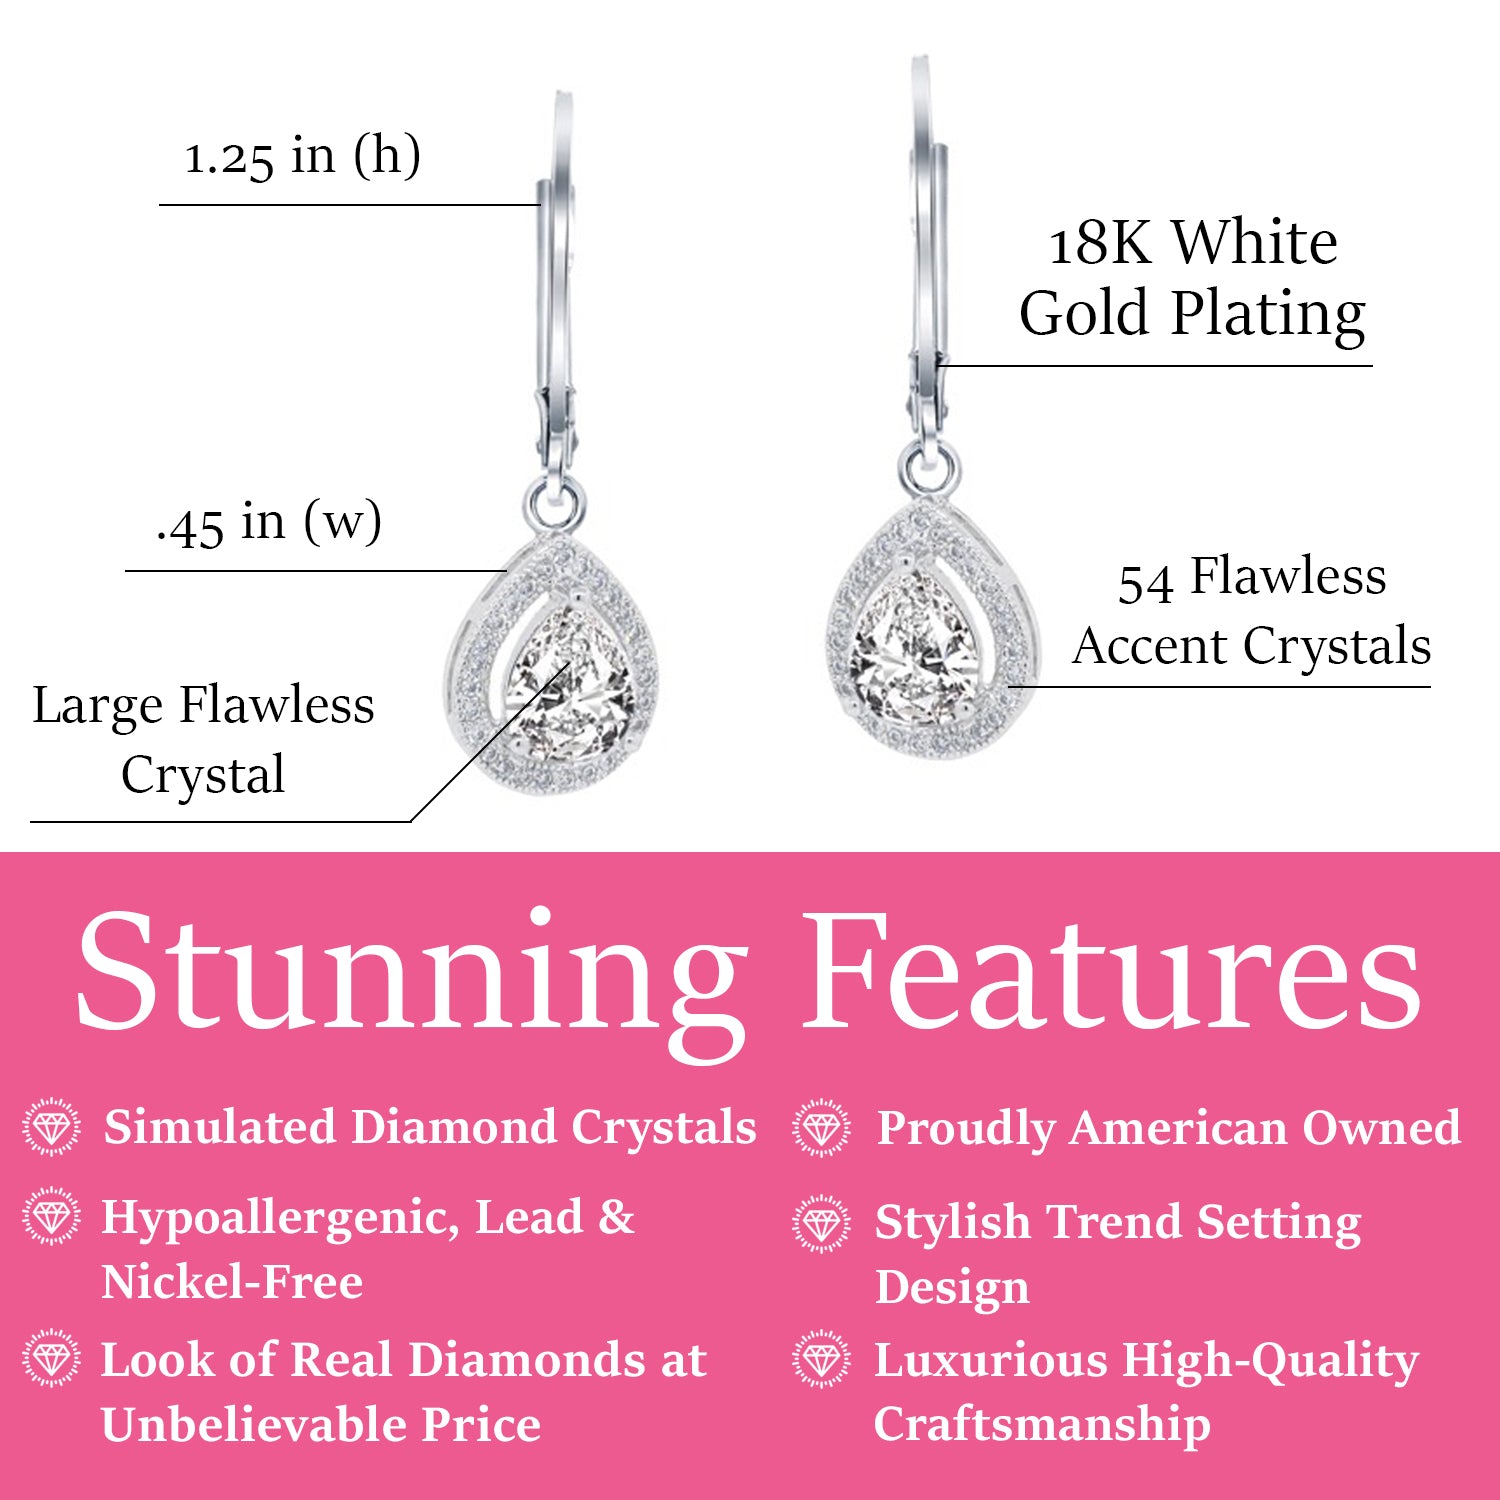 Izzy 18k White Gold Plated Halo Teardrop Earrings with Crystals